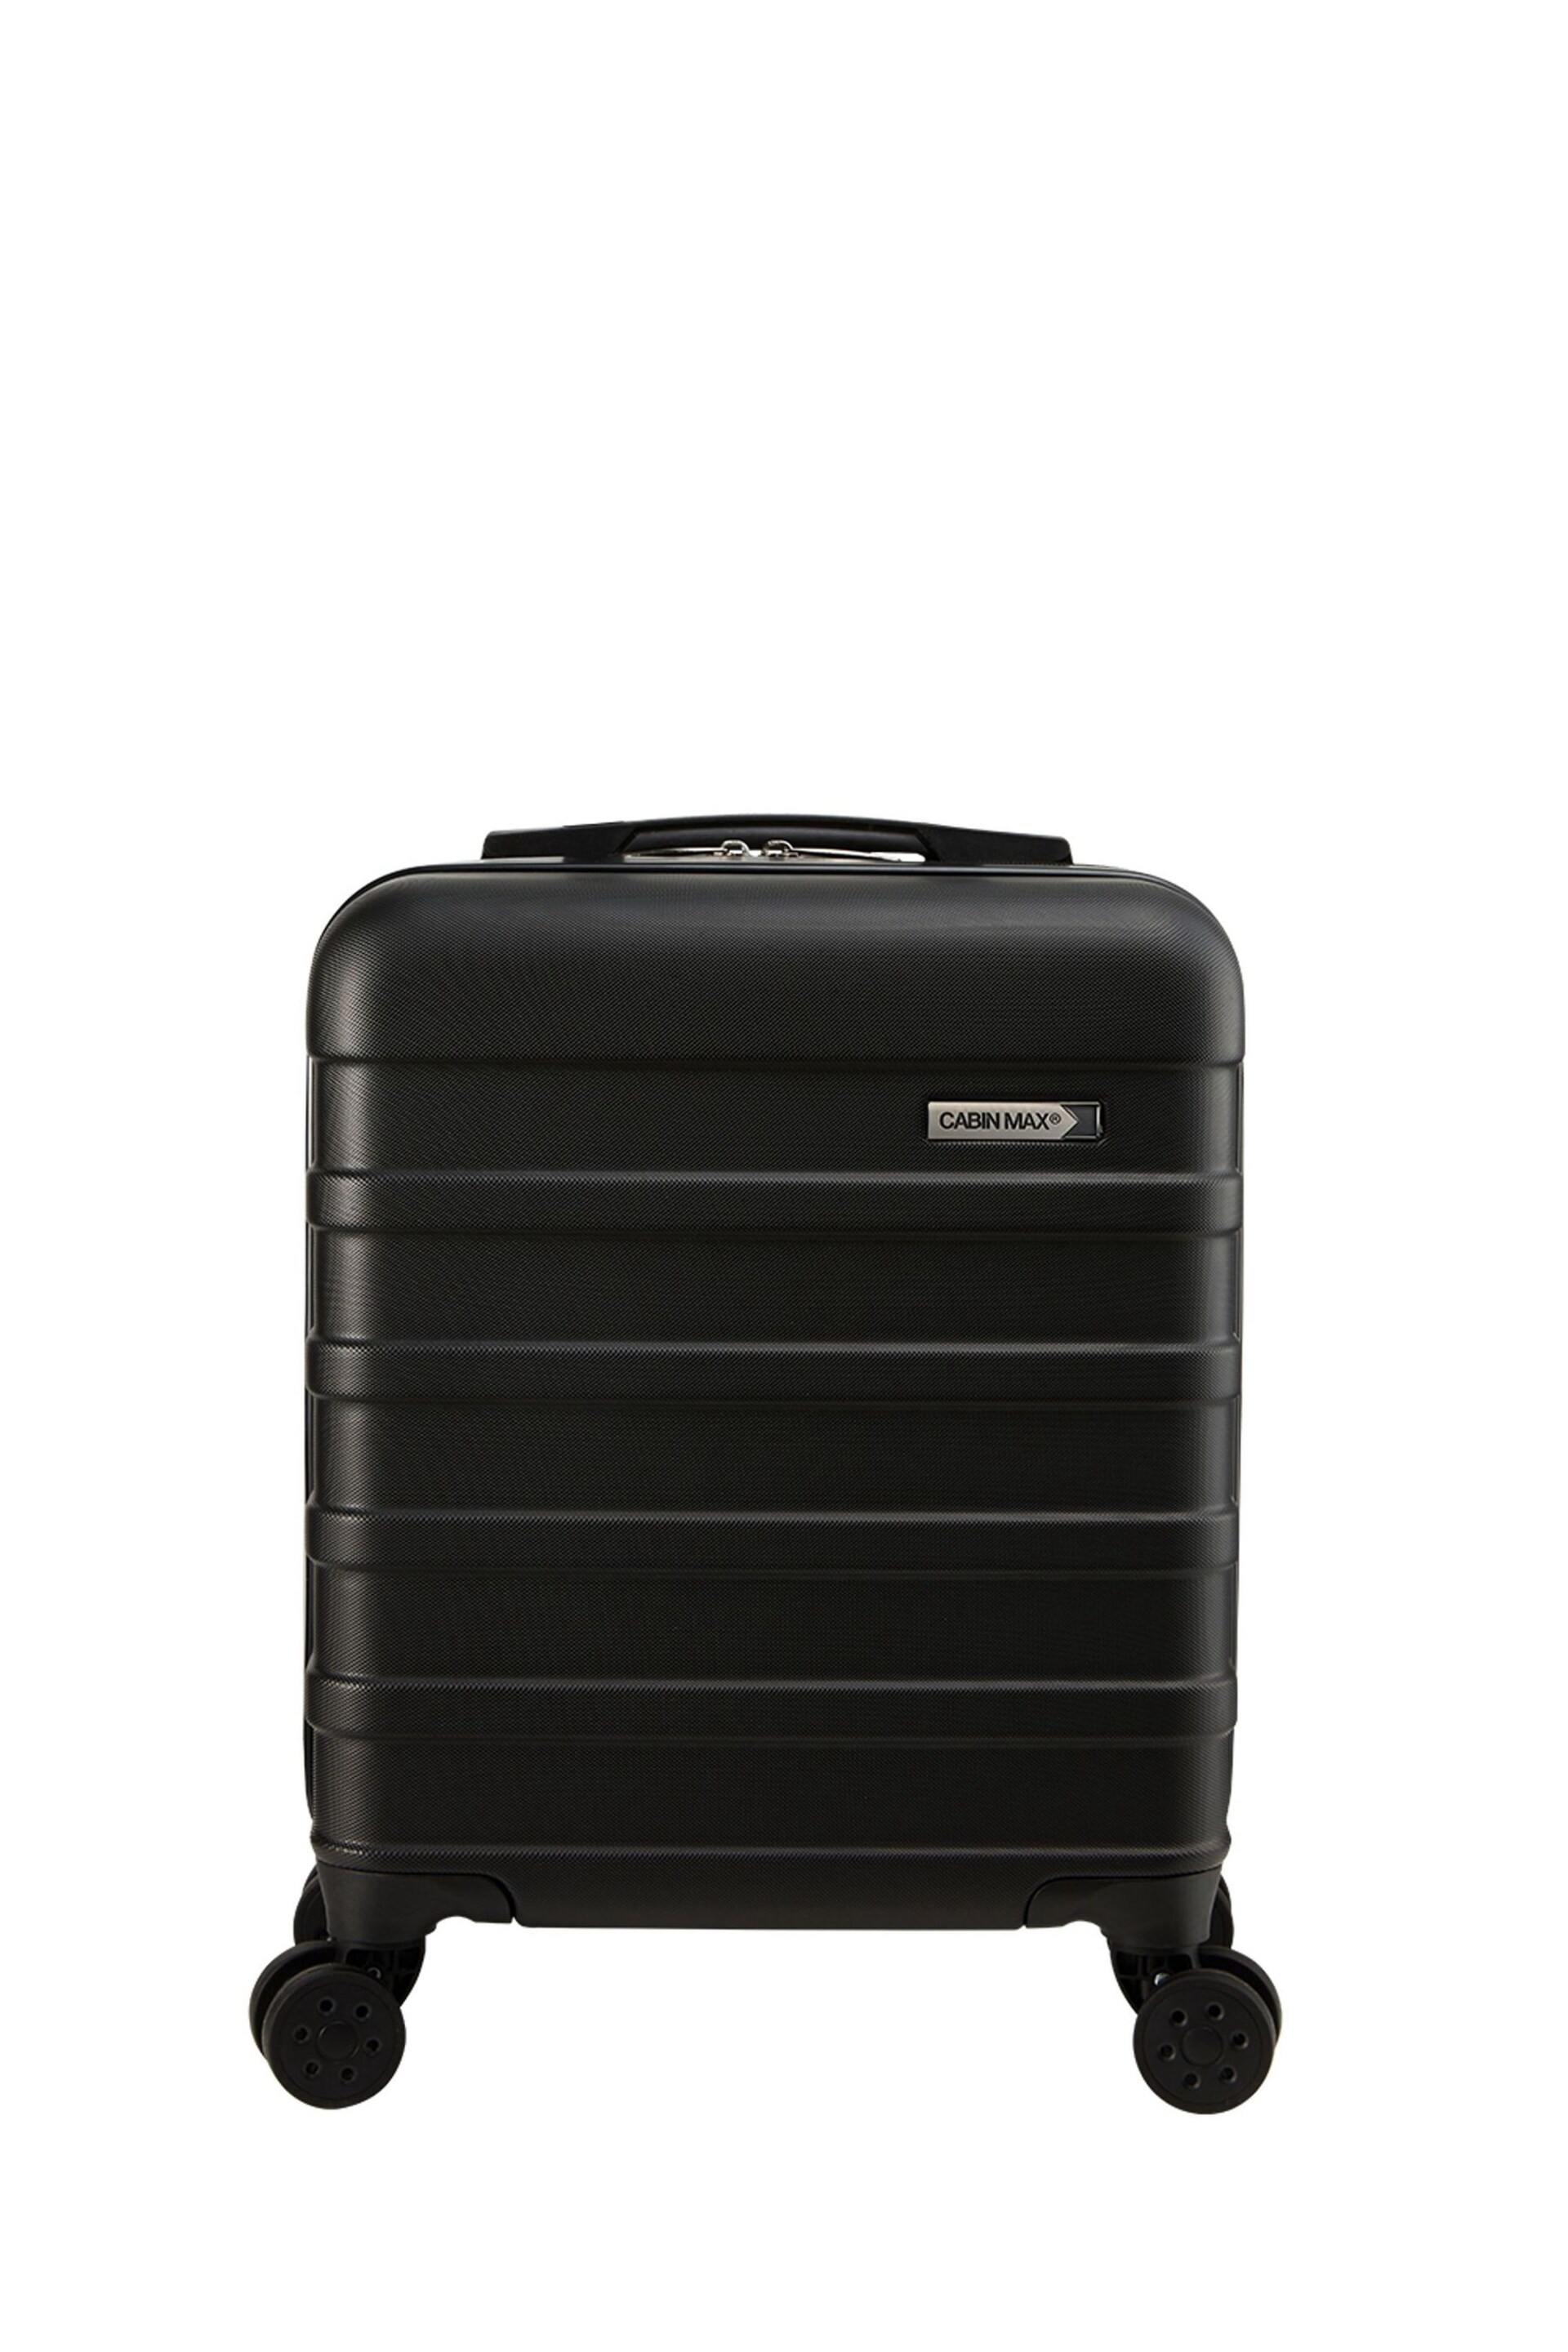 Cabin Max Anode Four Wheel Carry On Easyjet Sized Underseat 45cm Suitcase - Image 1 of 6